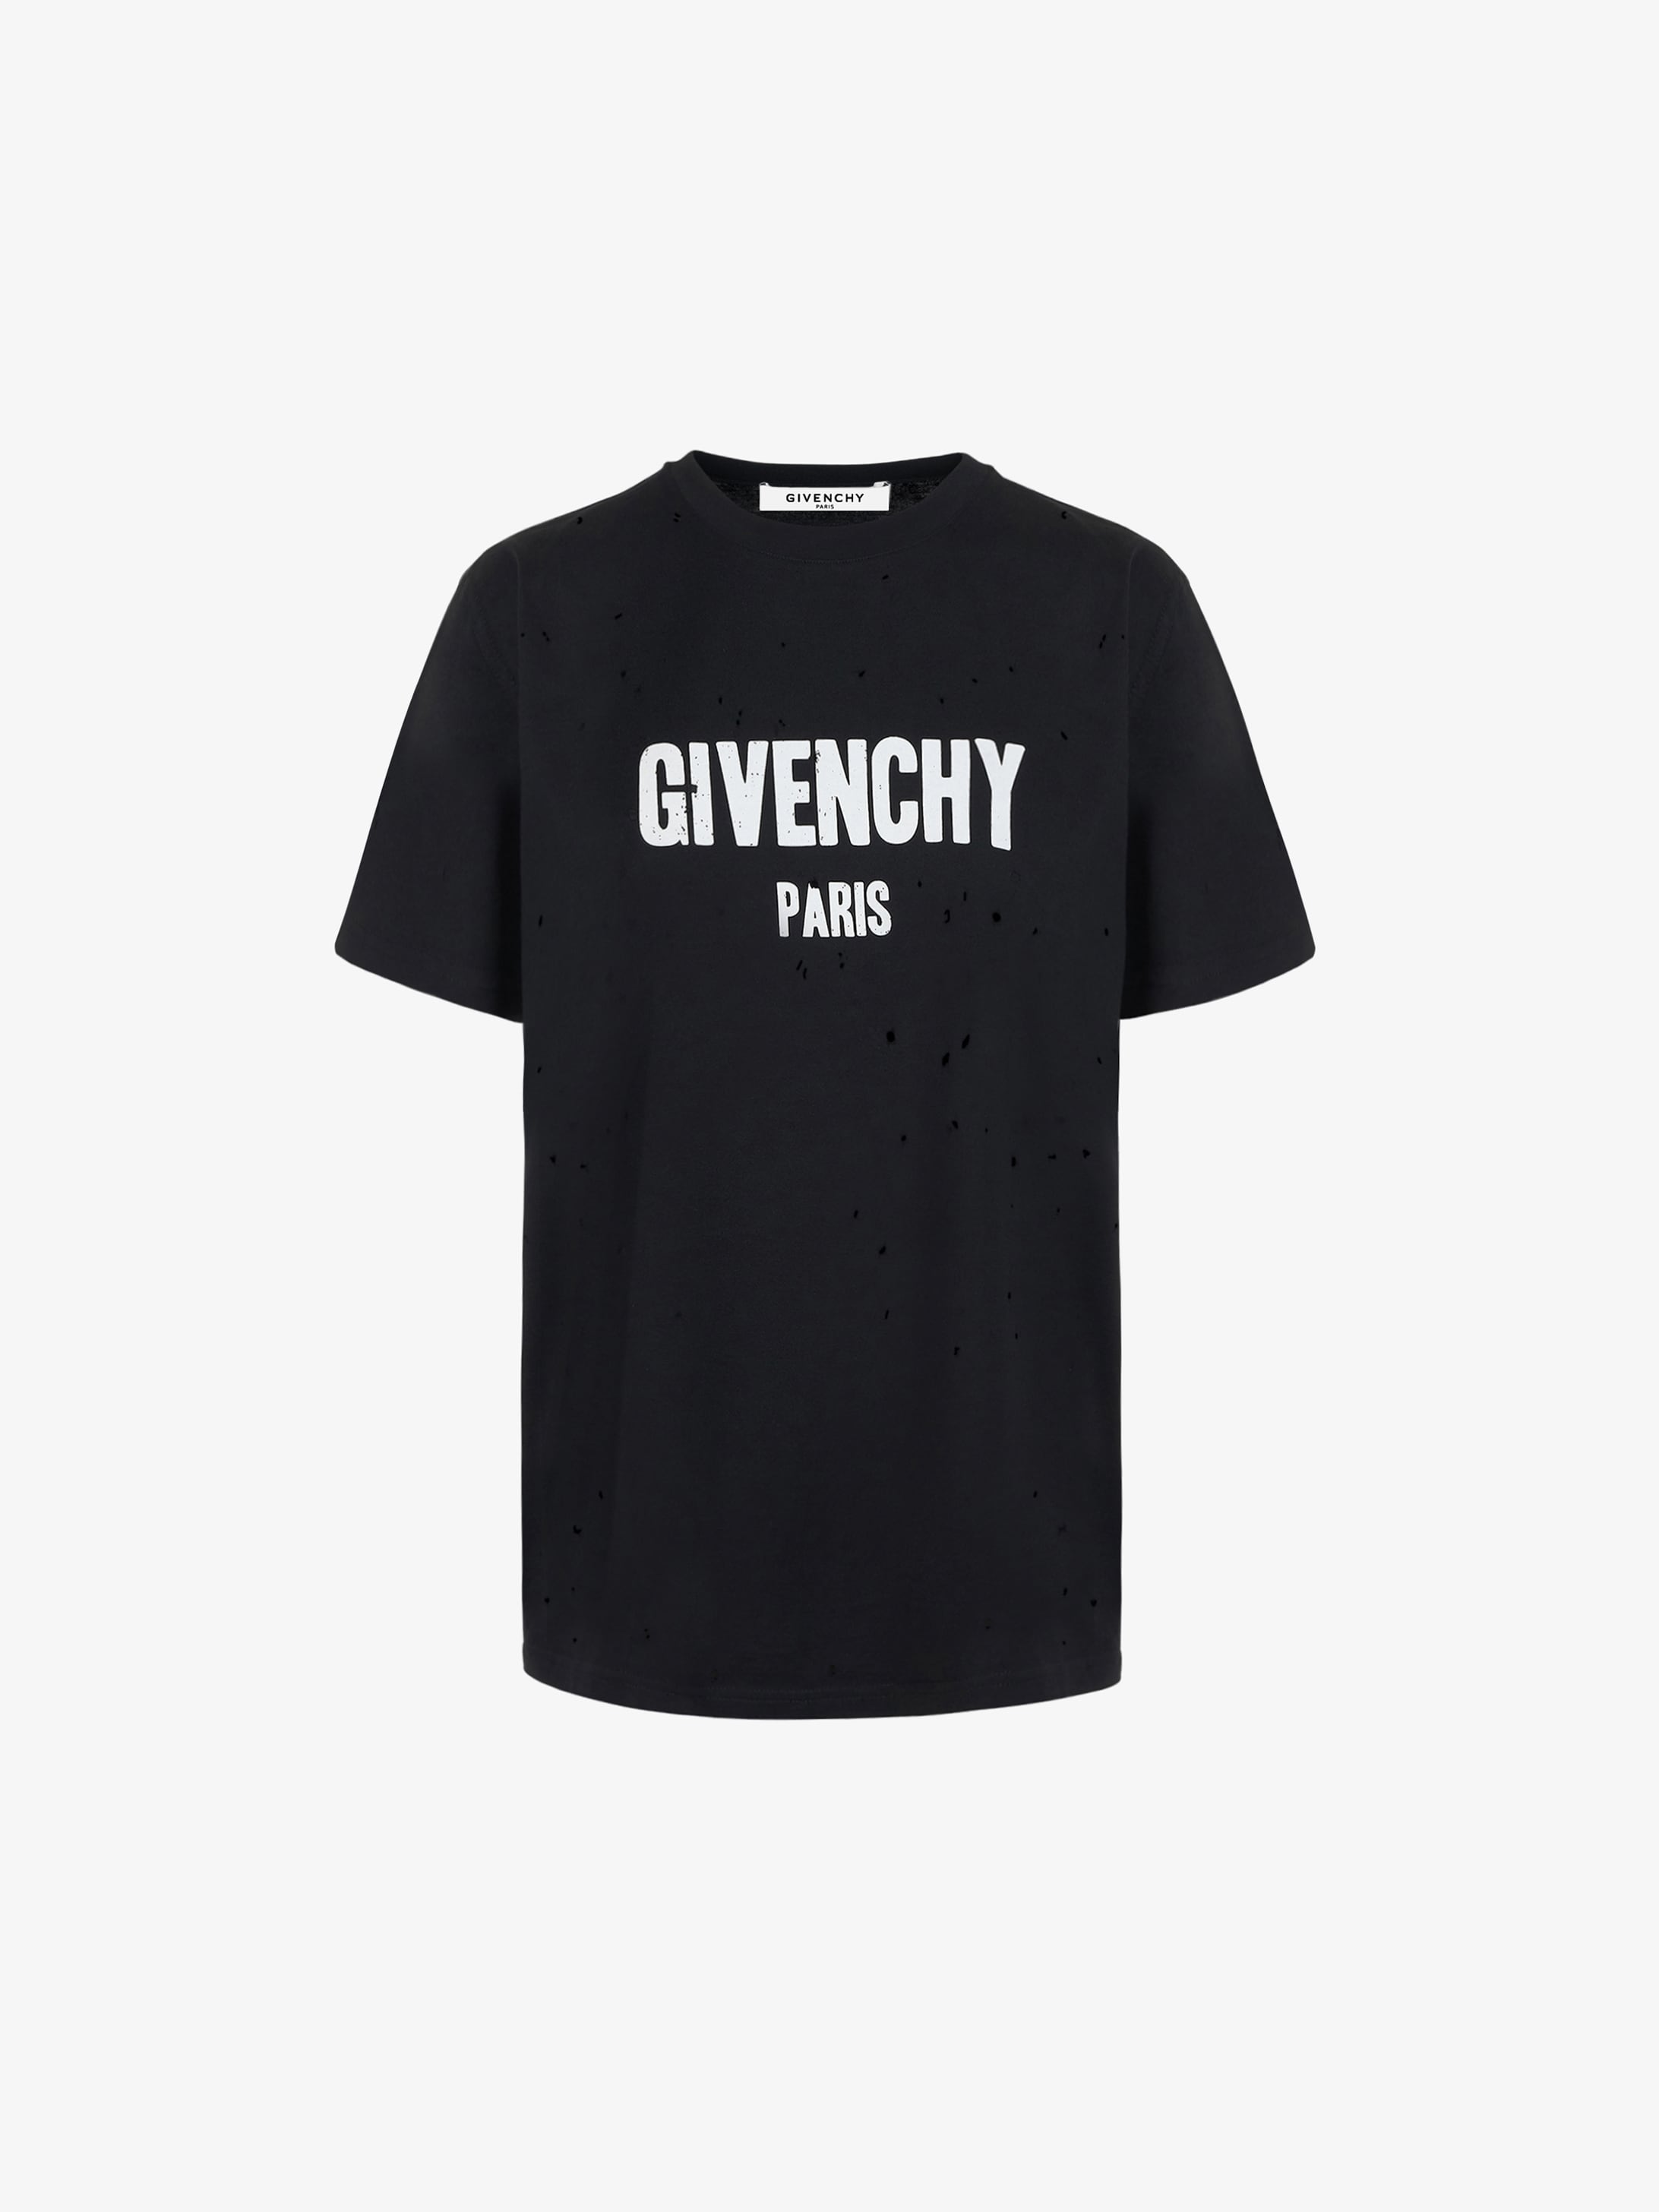 givenchy t shirt with holes